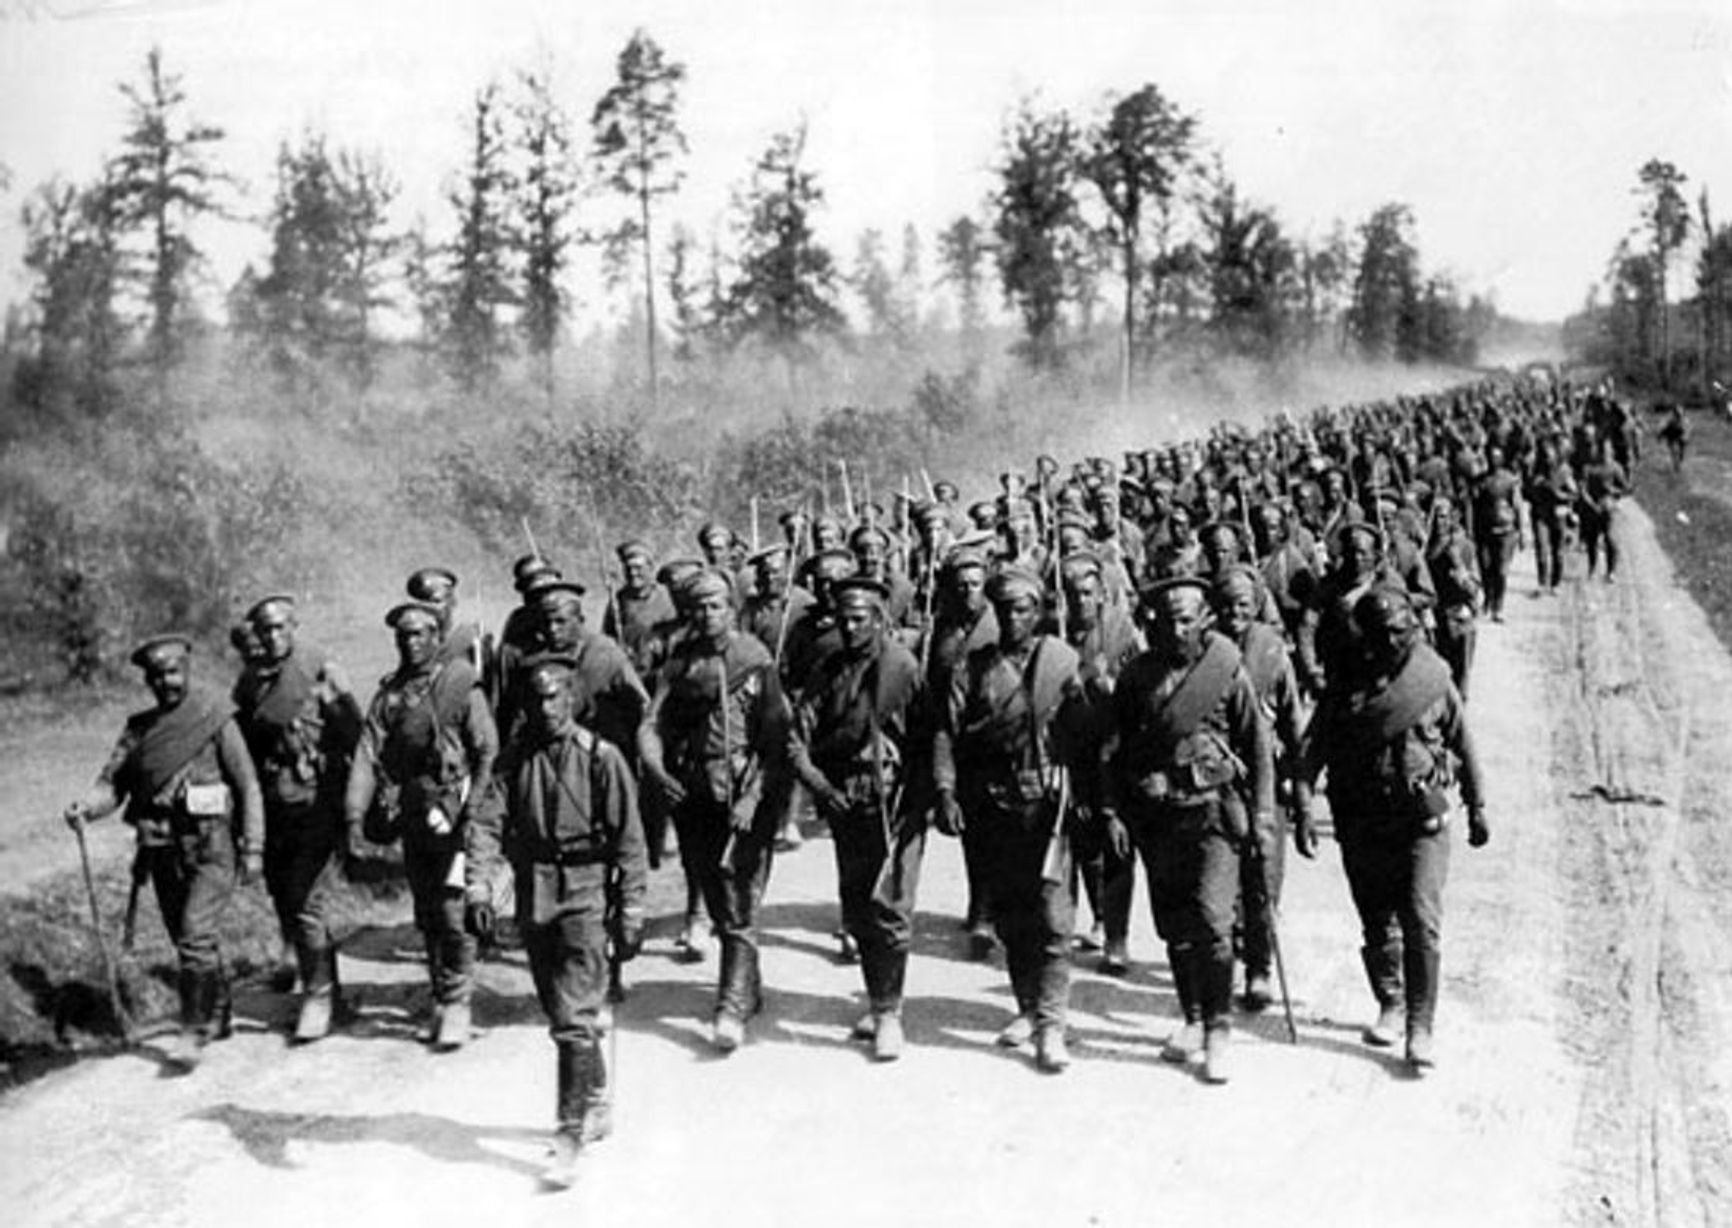 Russian infantry marching on a road in Poland. Early stage of WWI, 1914